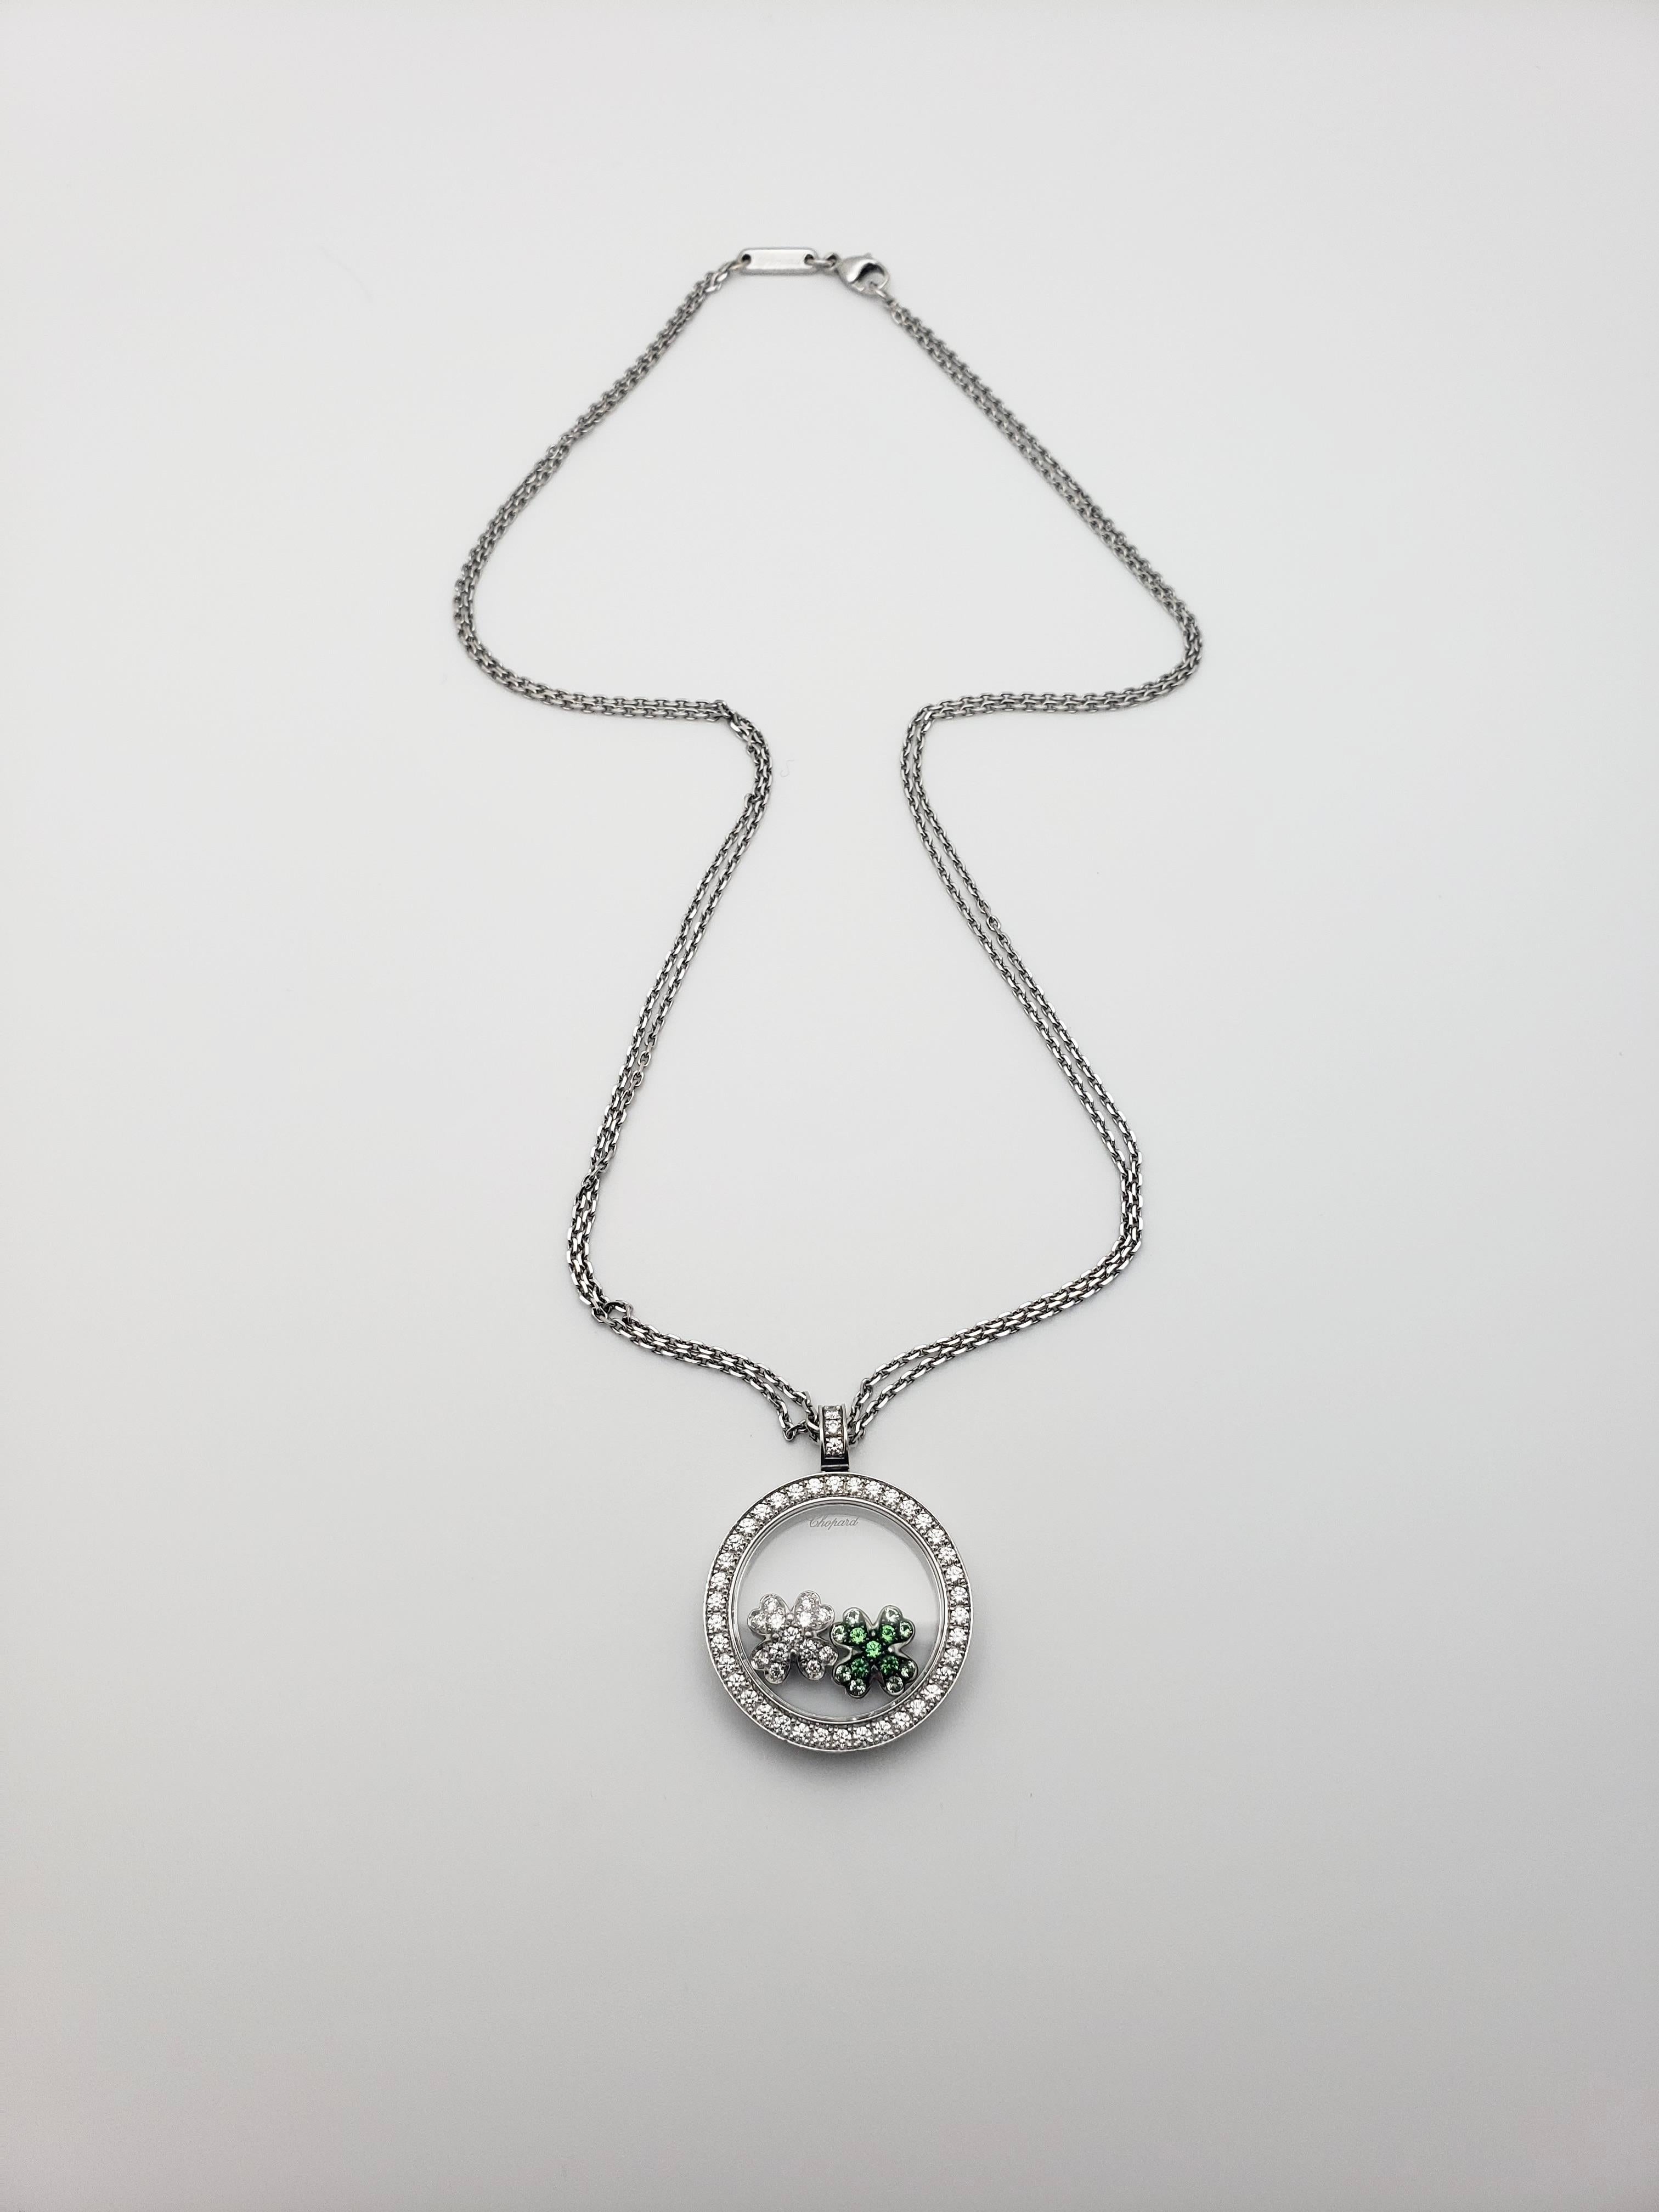 An authentic 18K white gold double chained diamond pendant, with happy diamond Irish clovers sealed within a double sided see-through natural crystal sapphire (corundum) case. The two happy diamond and graduated green tsavorite clovers move freely